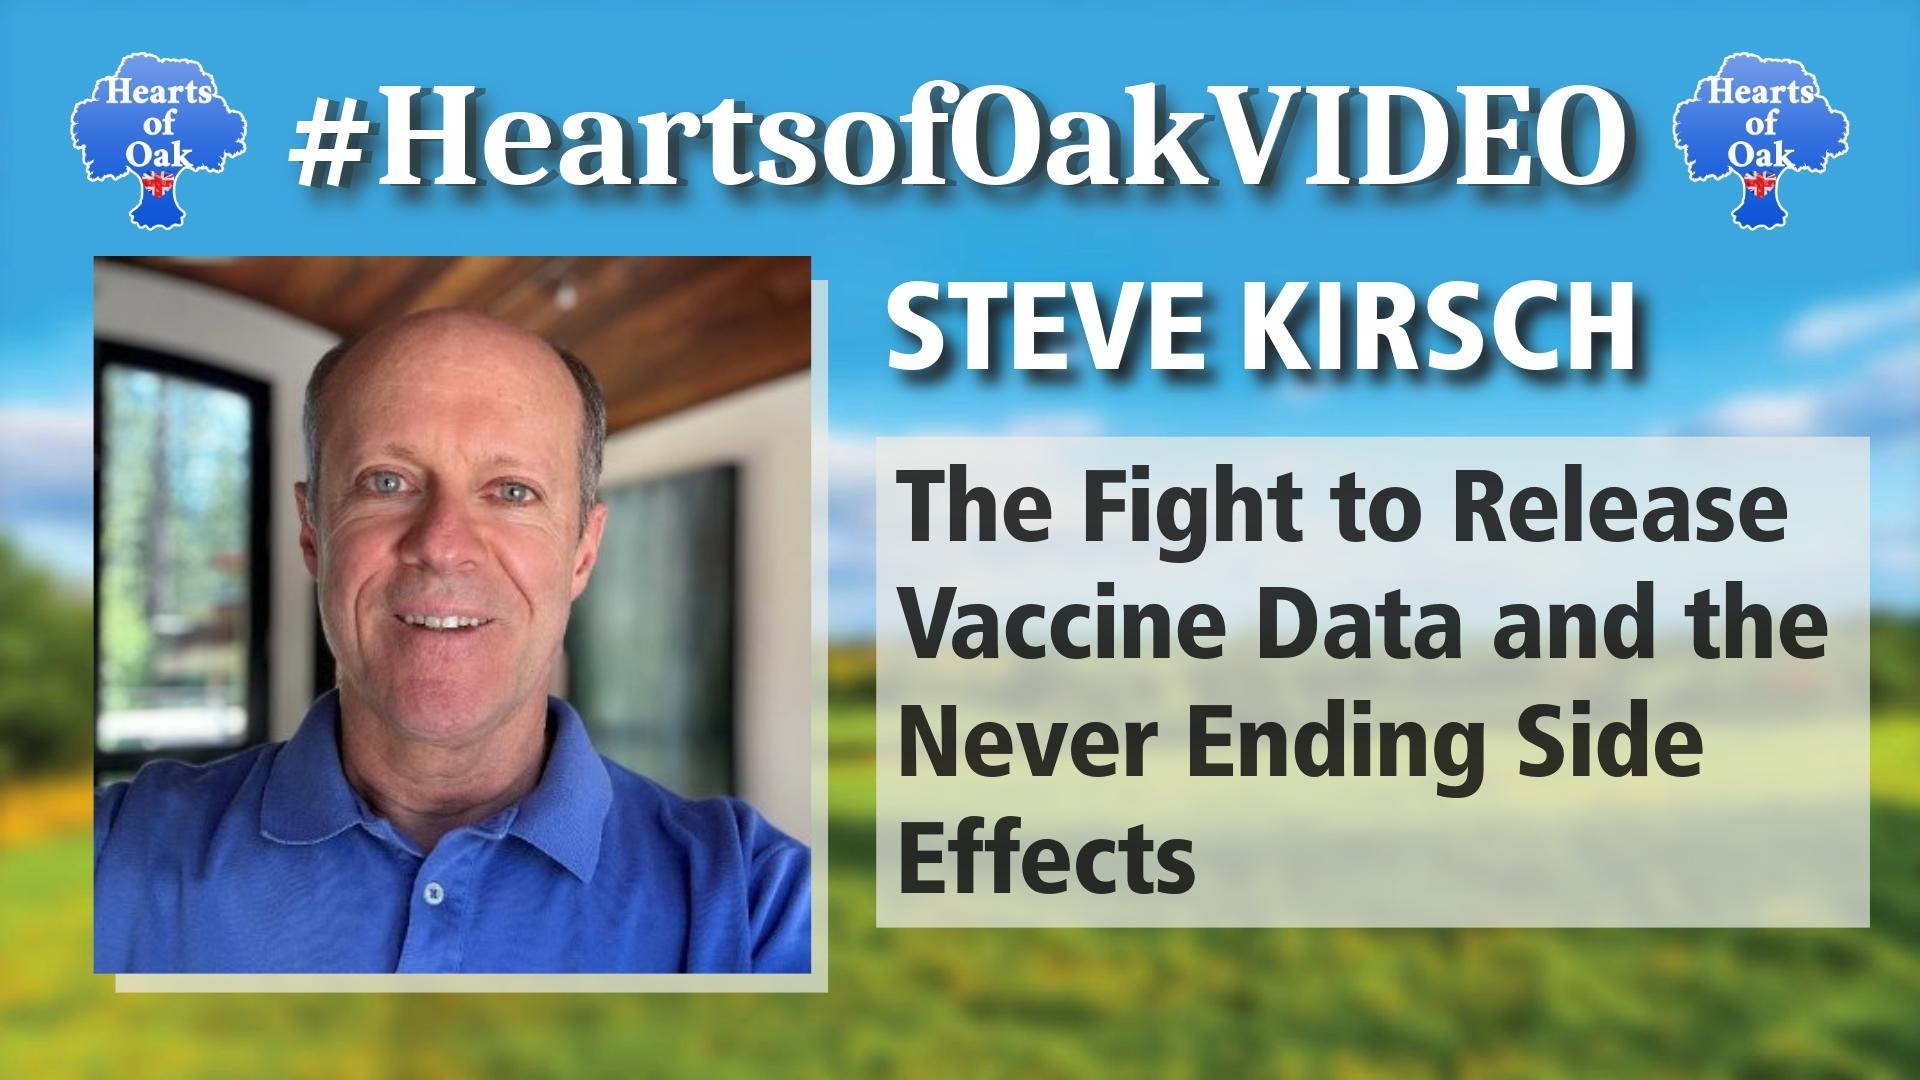 Steve Kirsch: The Fight to Release Vaccine Data and the Never Ending Side Effects